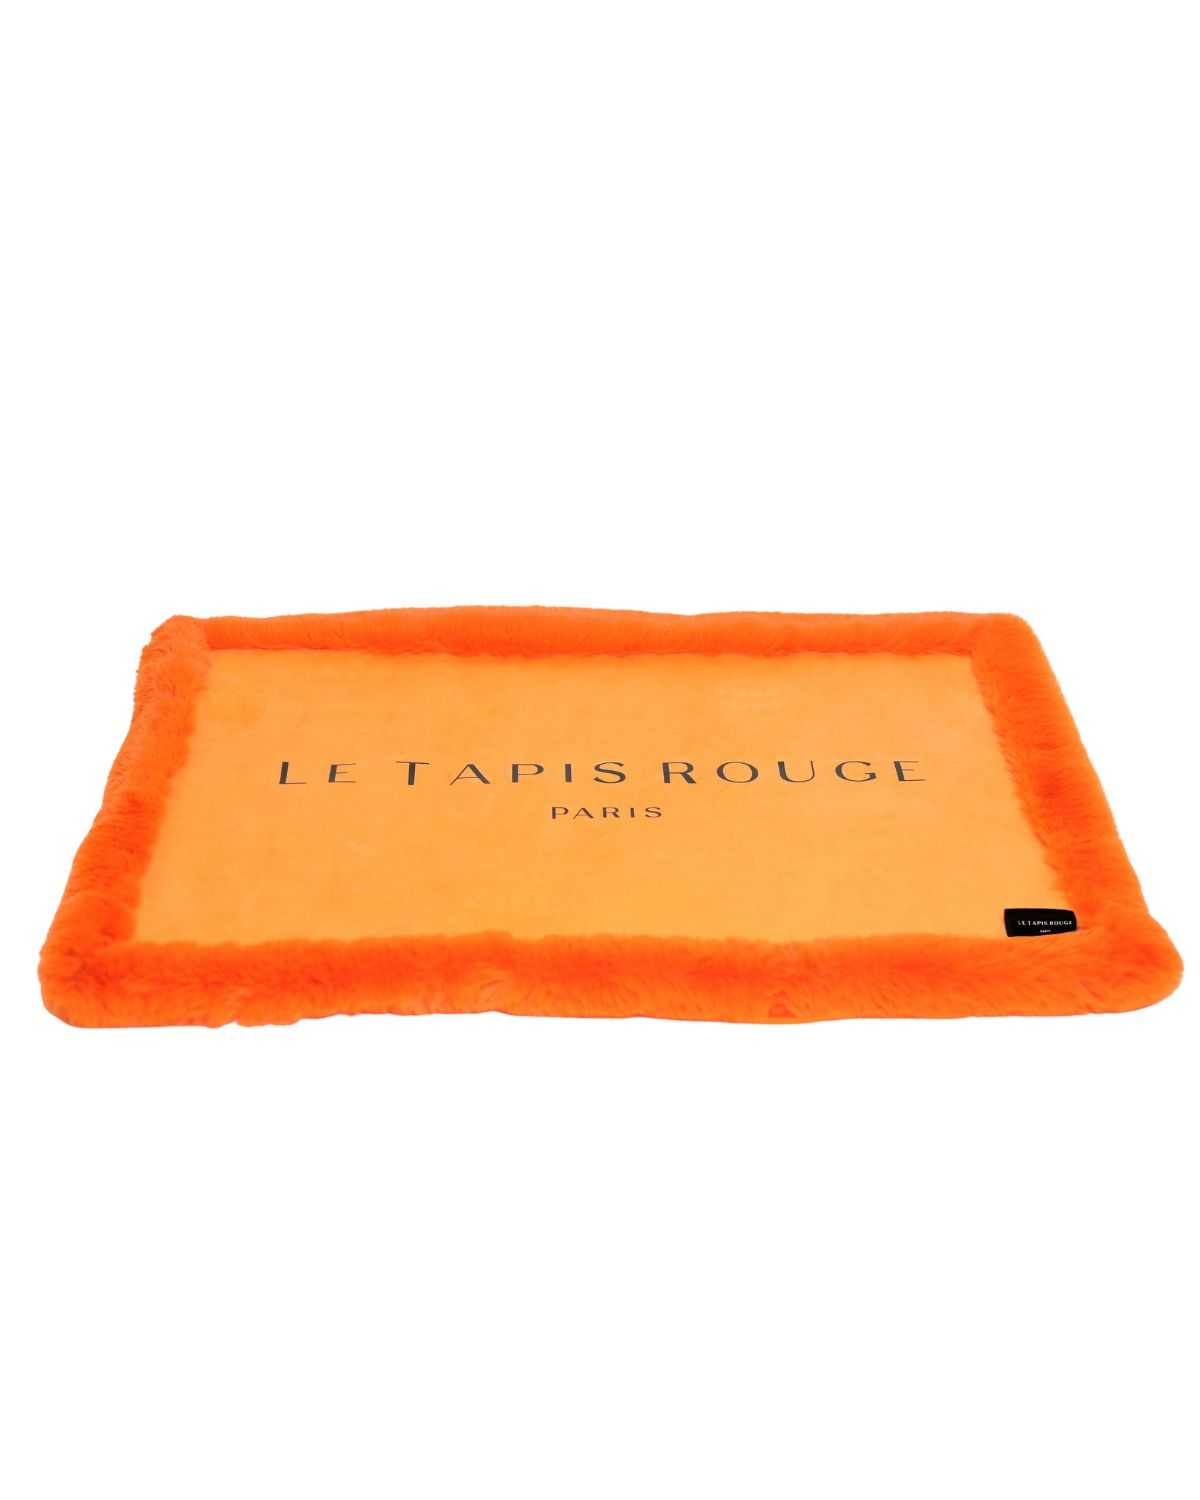 Le Tapis Lisse | Le Tapis Rouge Paris | Luxury carpet for dogs and cats in synthetic fur